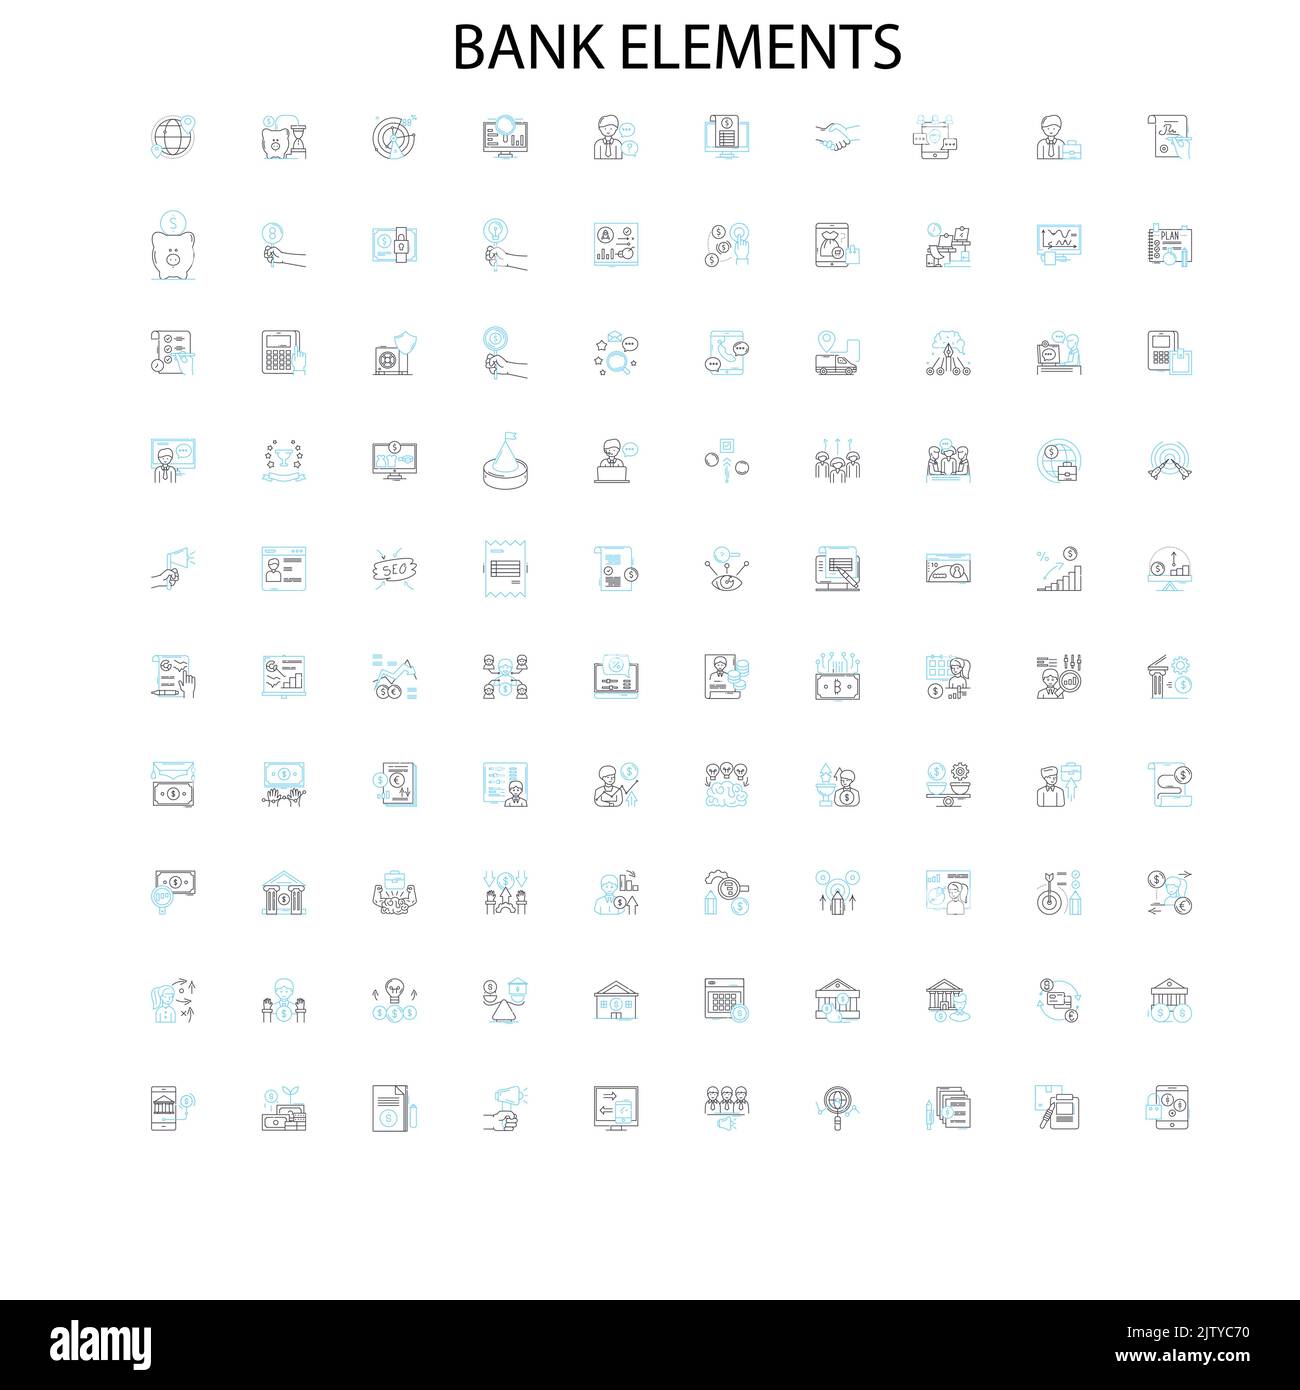 bank elements icons, signs, outline symbols, concept linear illustration line collection Stock Vector